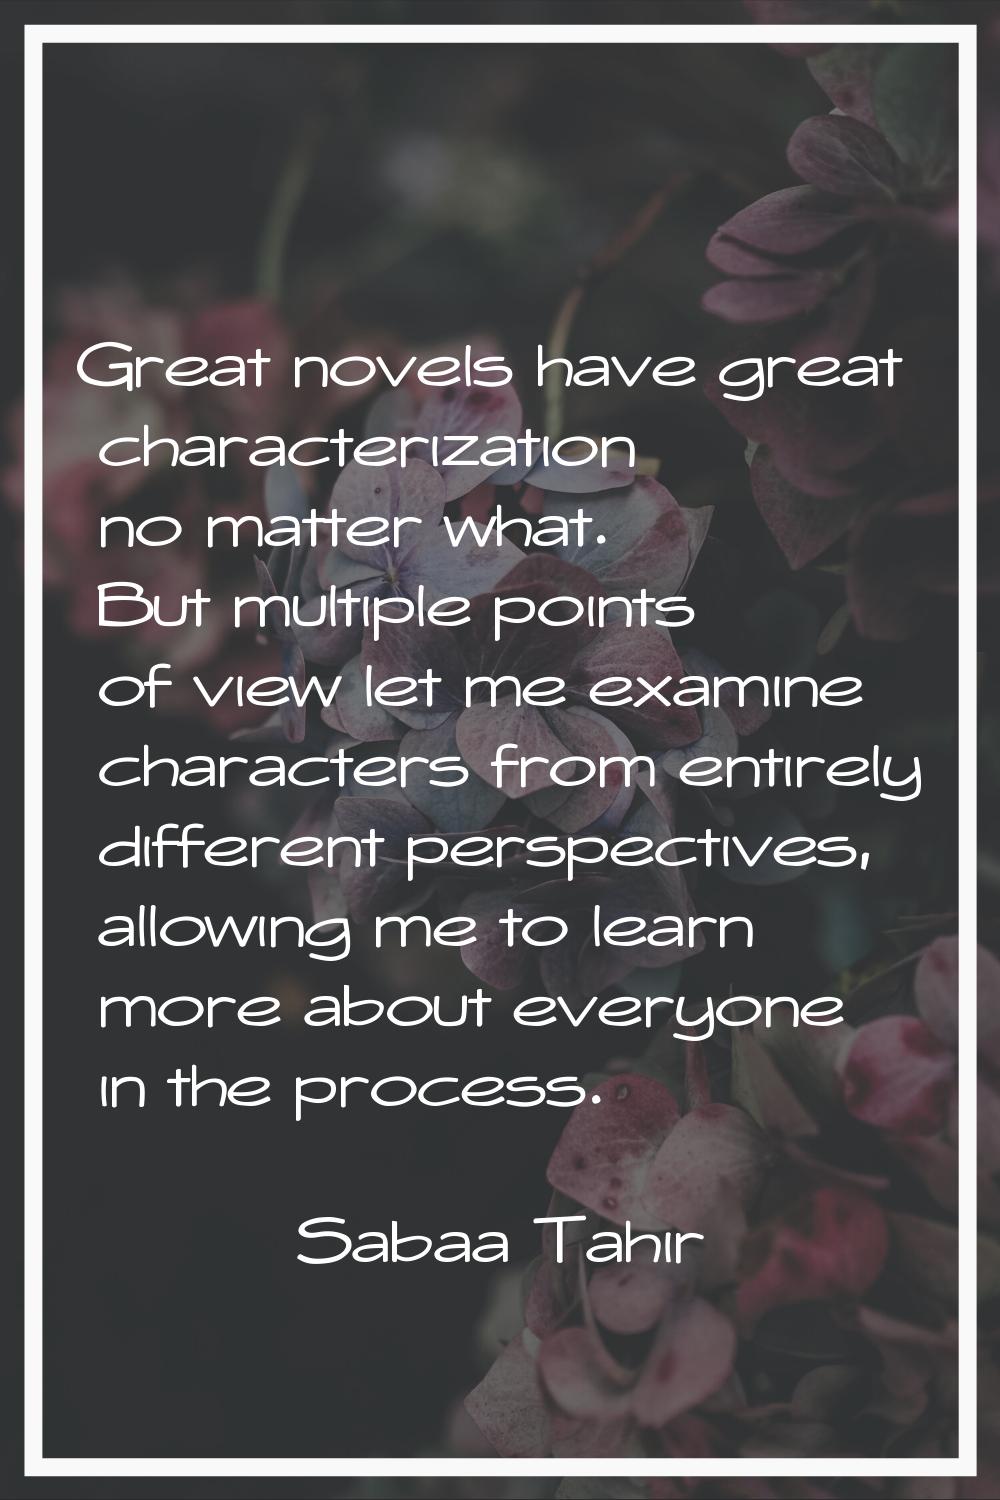 Great novels have great characterization no matter what. But multiple points of view let me examine